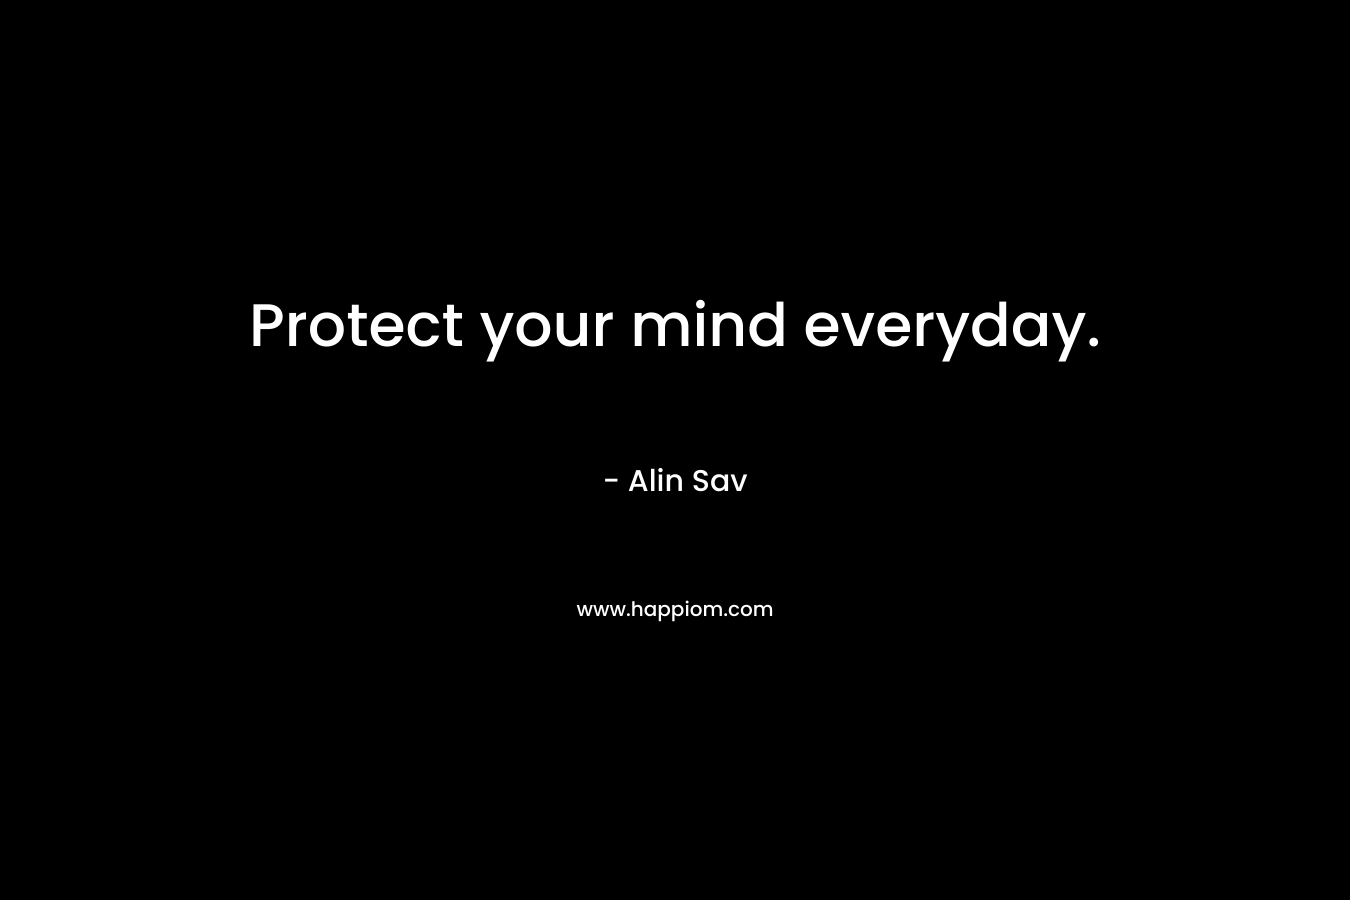 Protect your mind everyday.